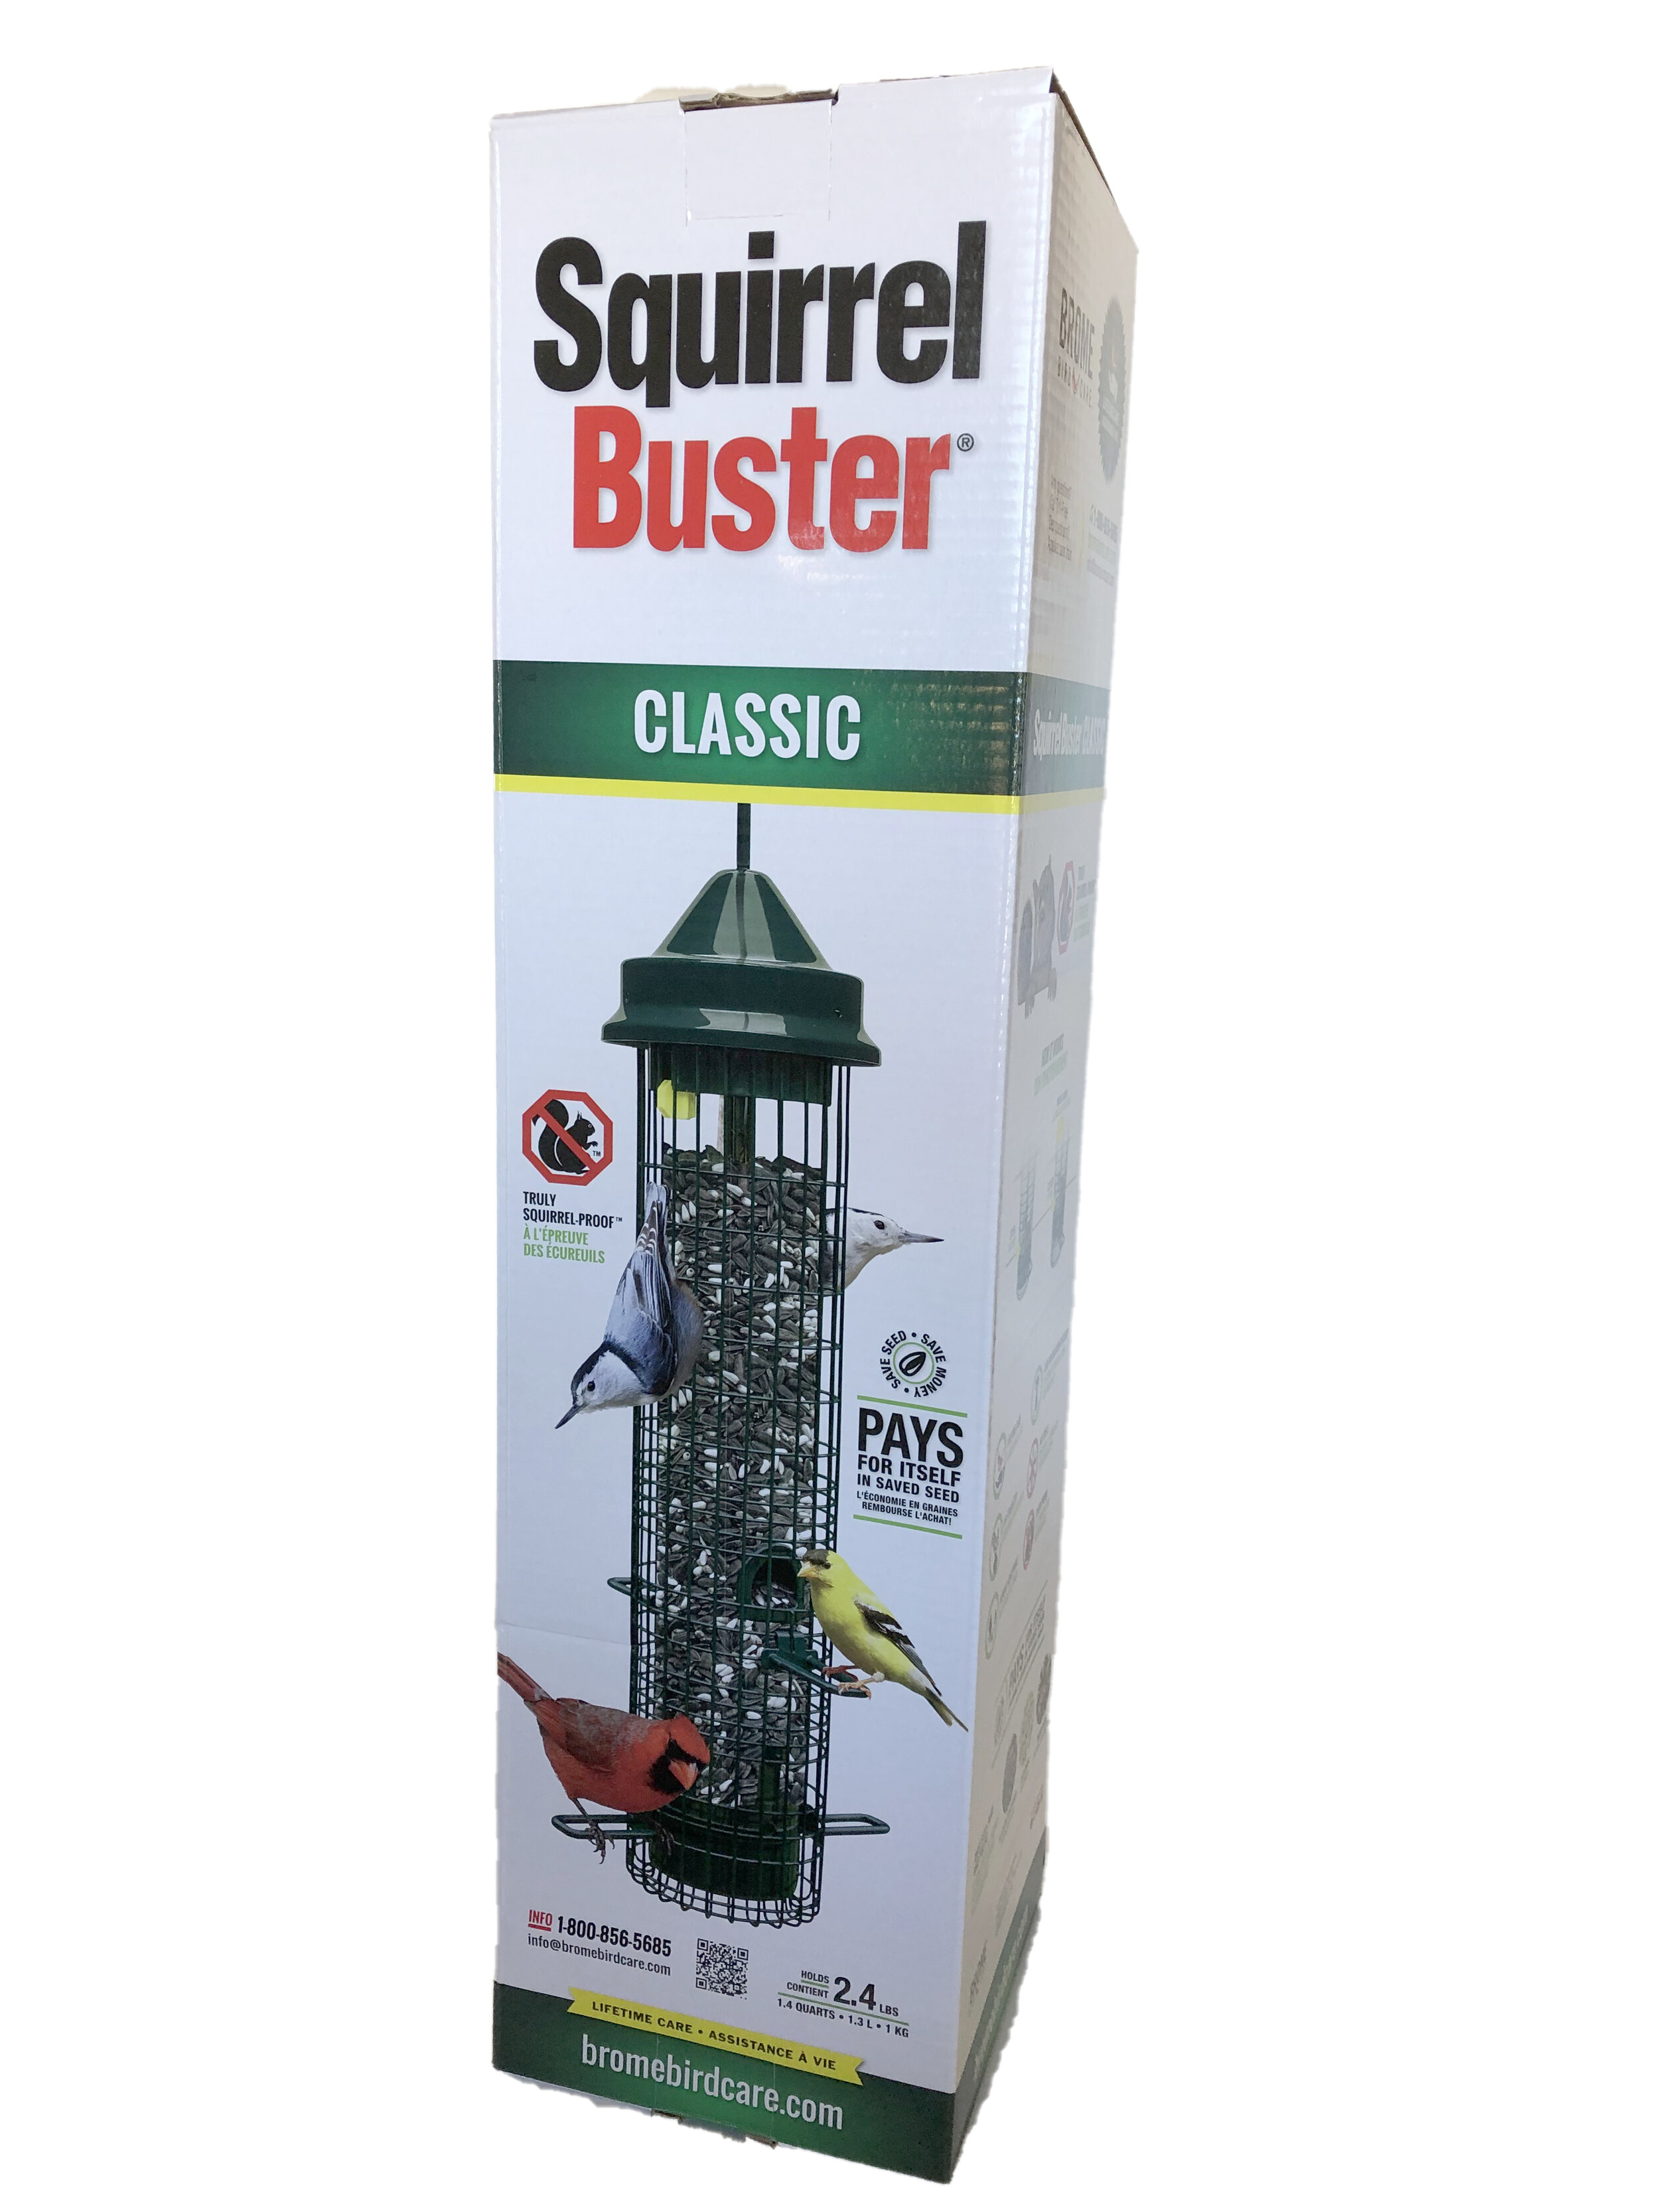 Squirrel Buster Classic - $65.00